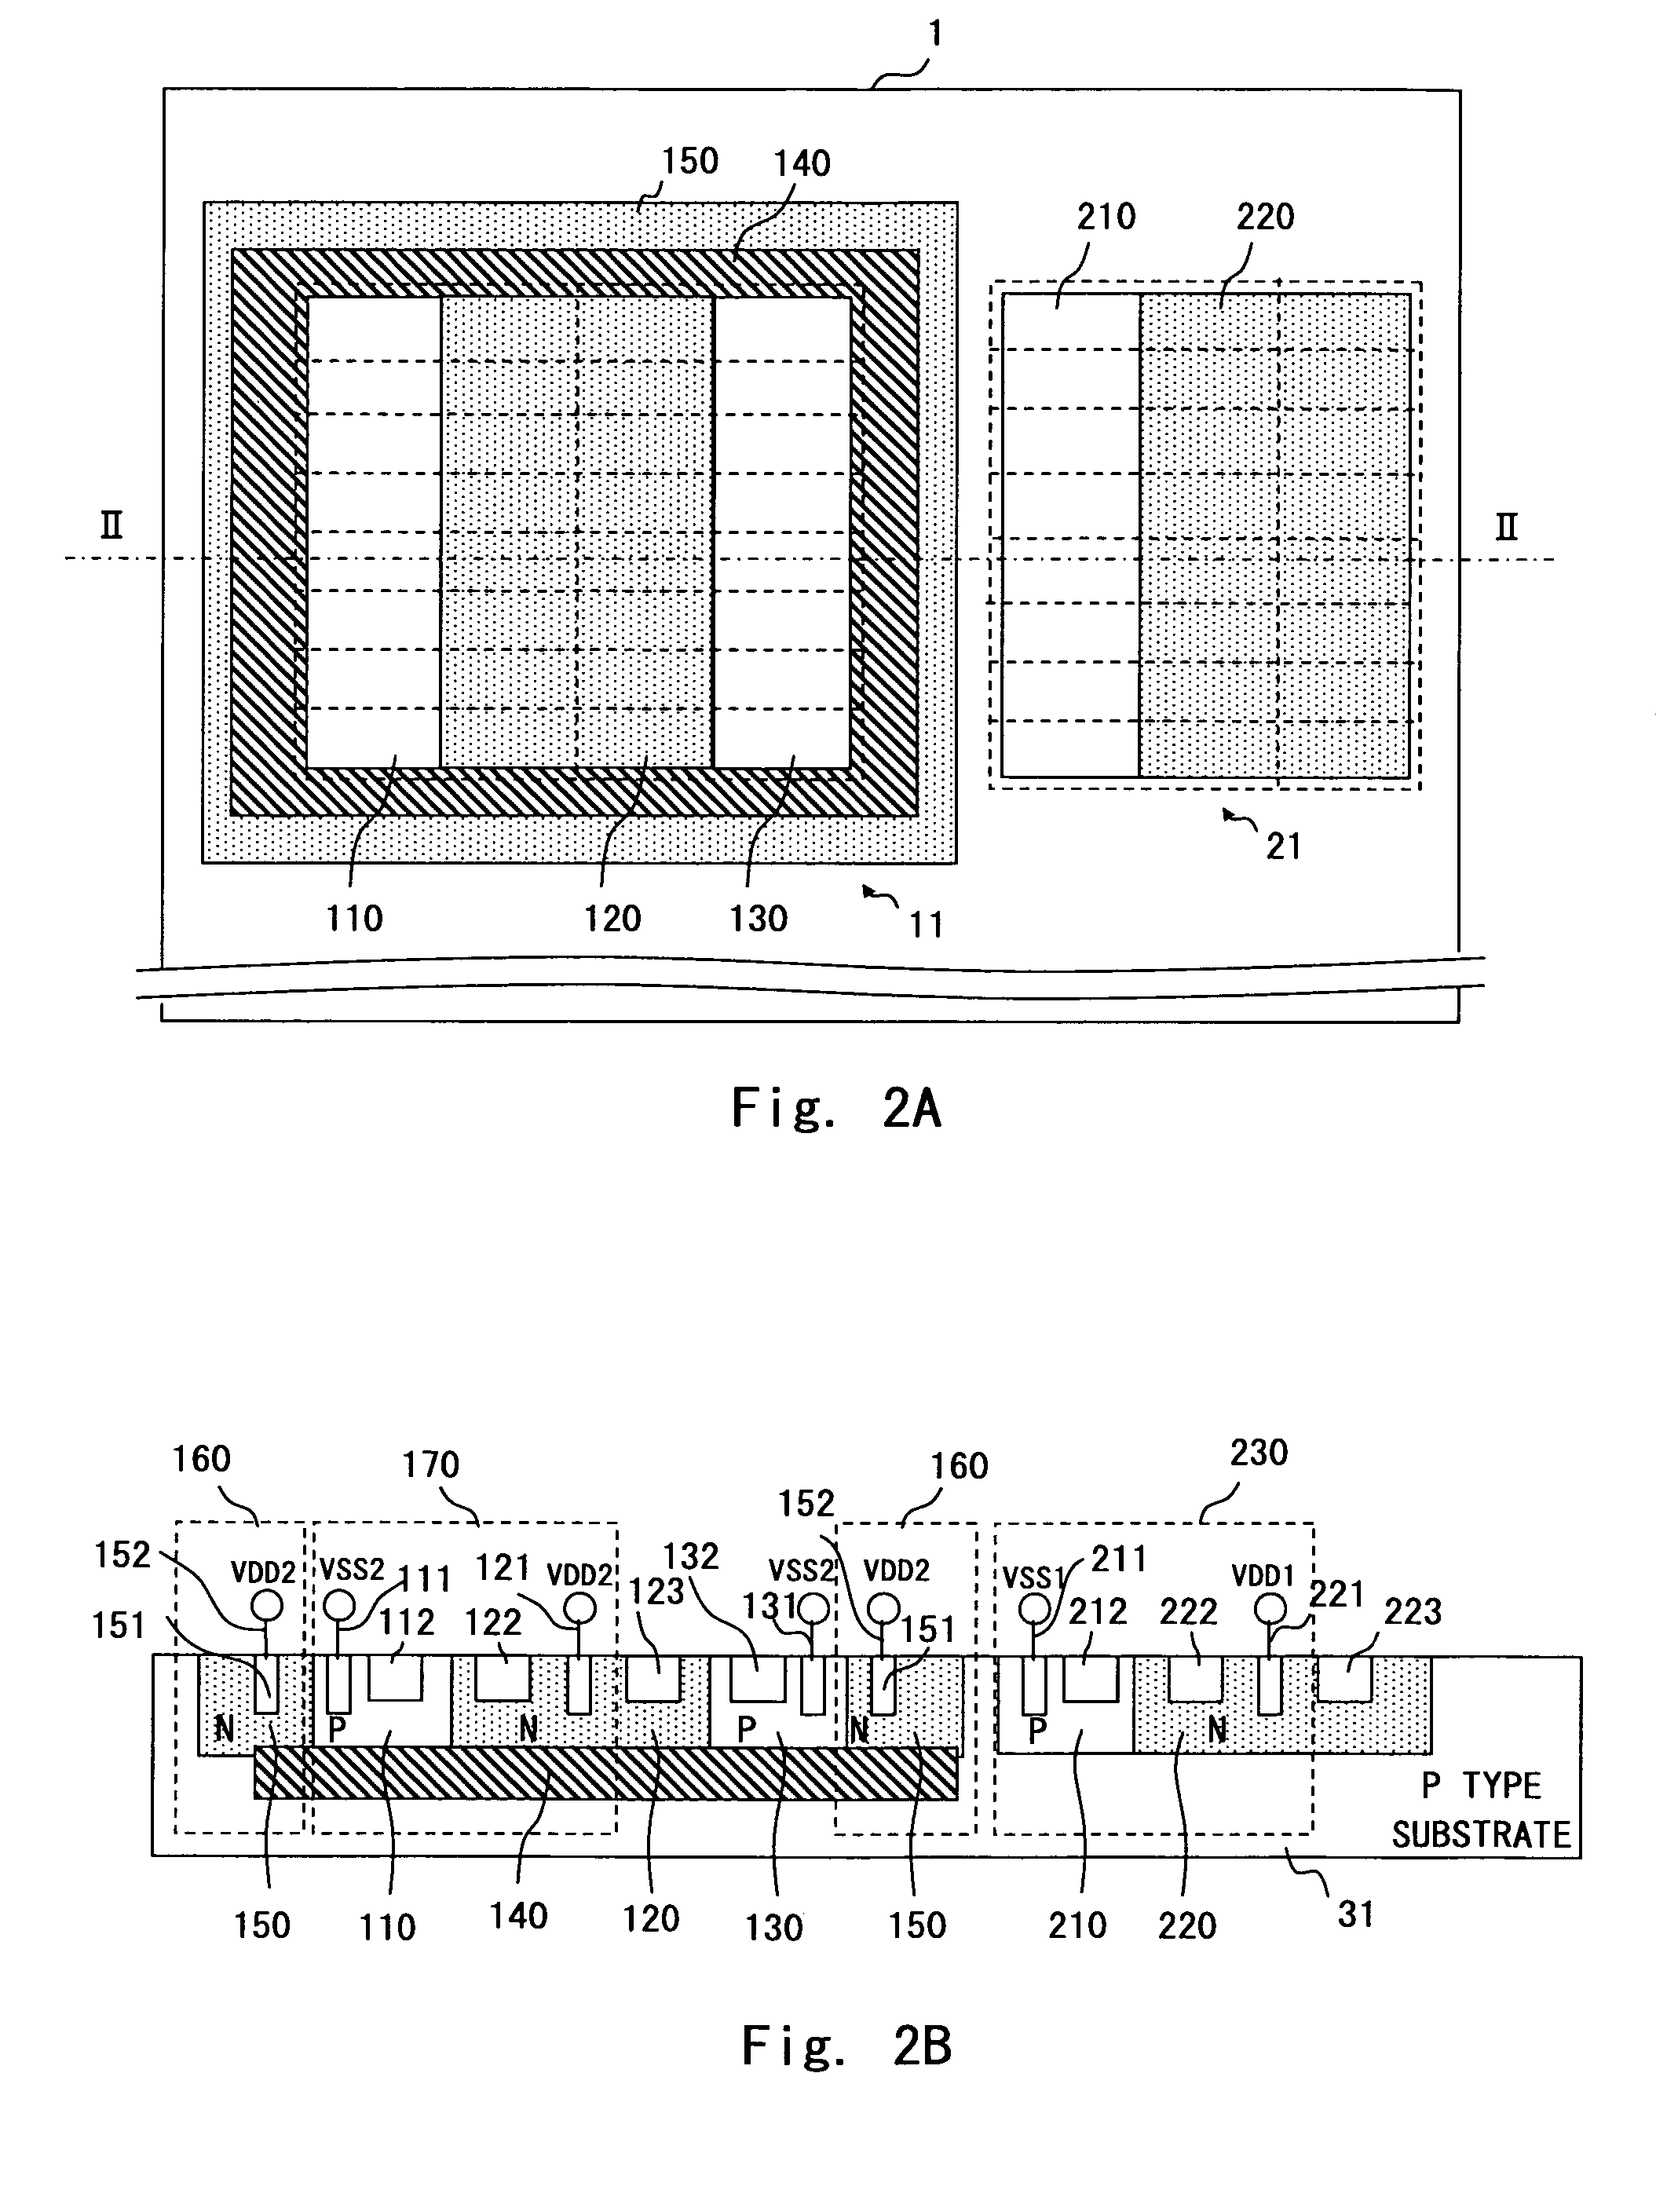 Layout design method of semiconductor integrated circuit having well supplied with potential different from substrate potential